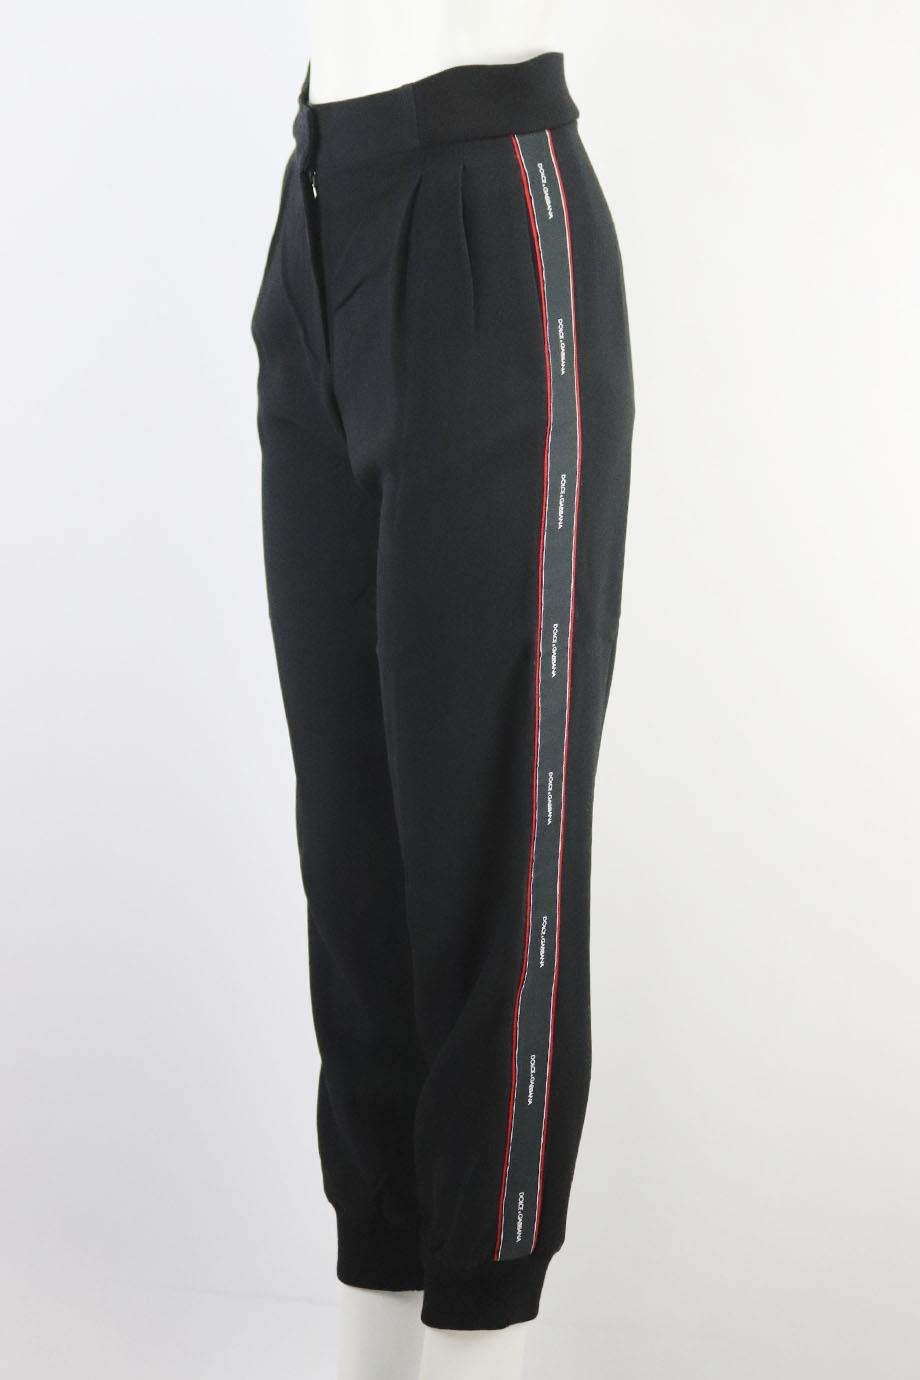 DOLCE AND GABBANA STRIPED WOOL BLEND TAPERED PANTS IT 38 UK 6